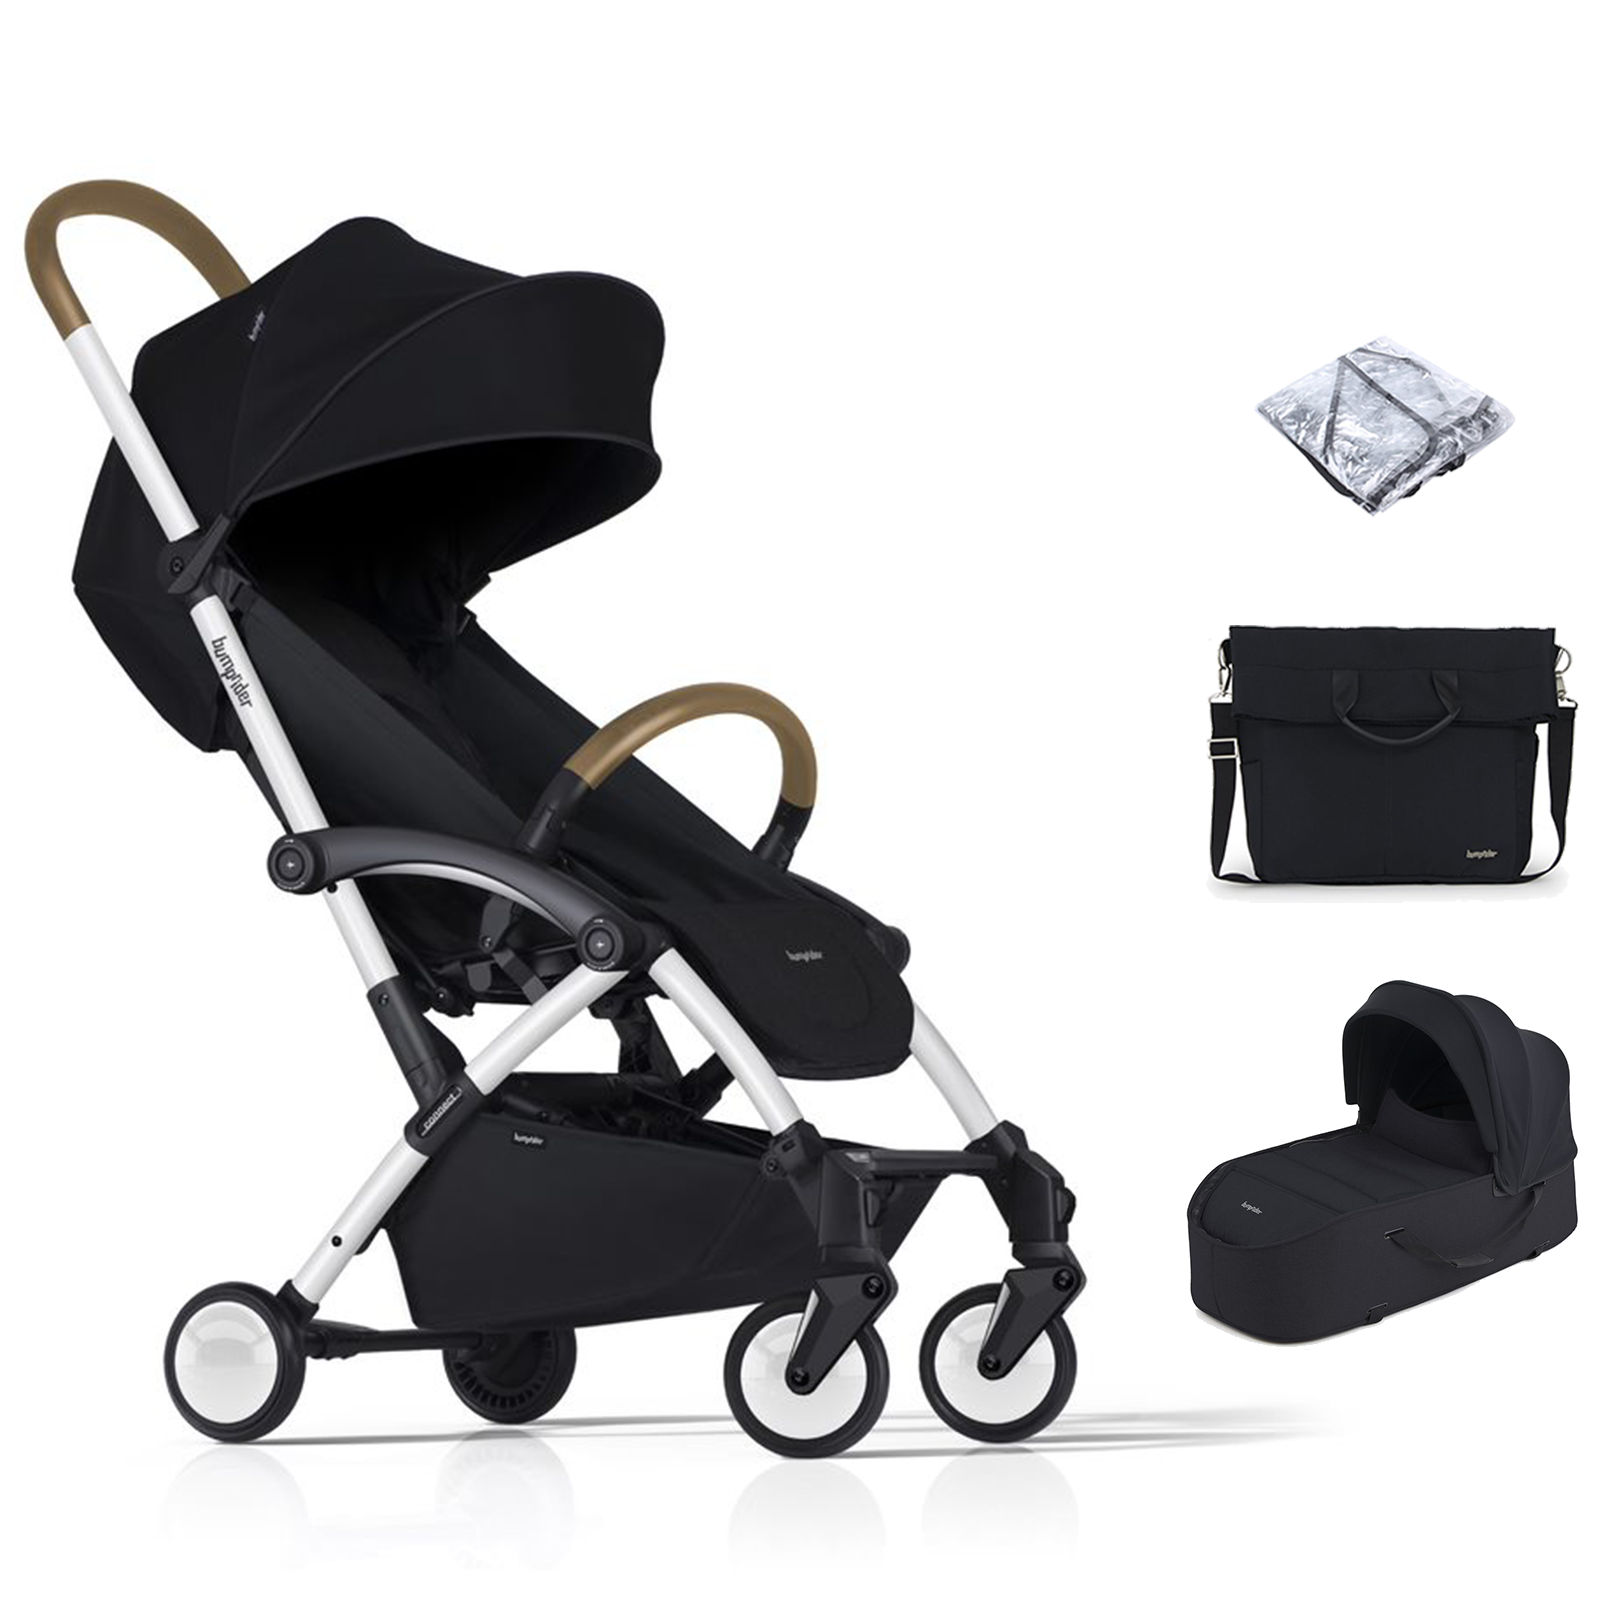 Bumprider Connect2 Stroller with Carrycot & Side Bag - White & Black